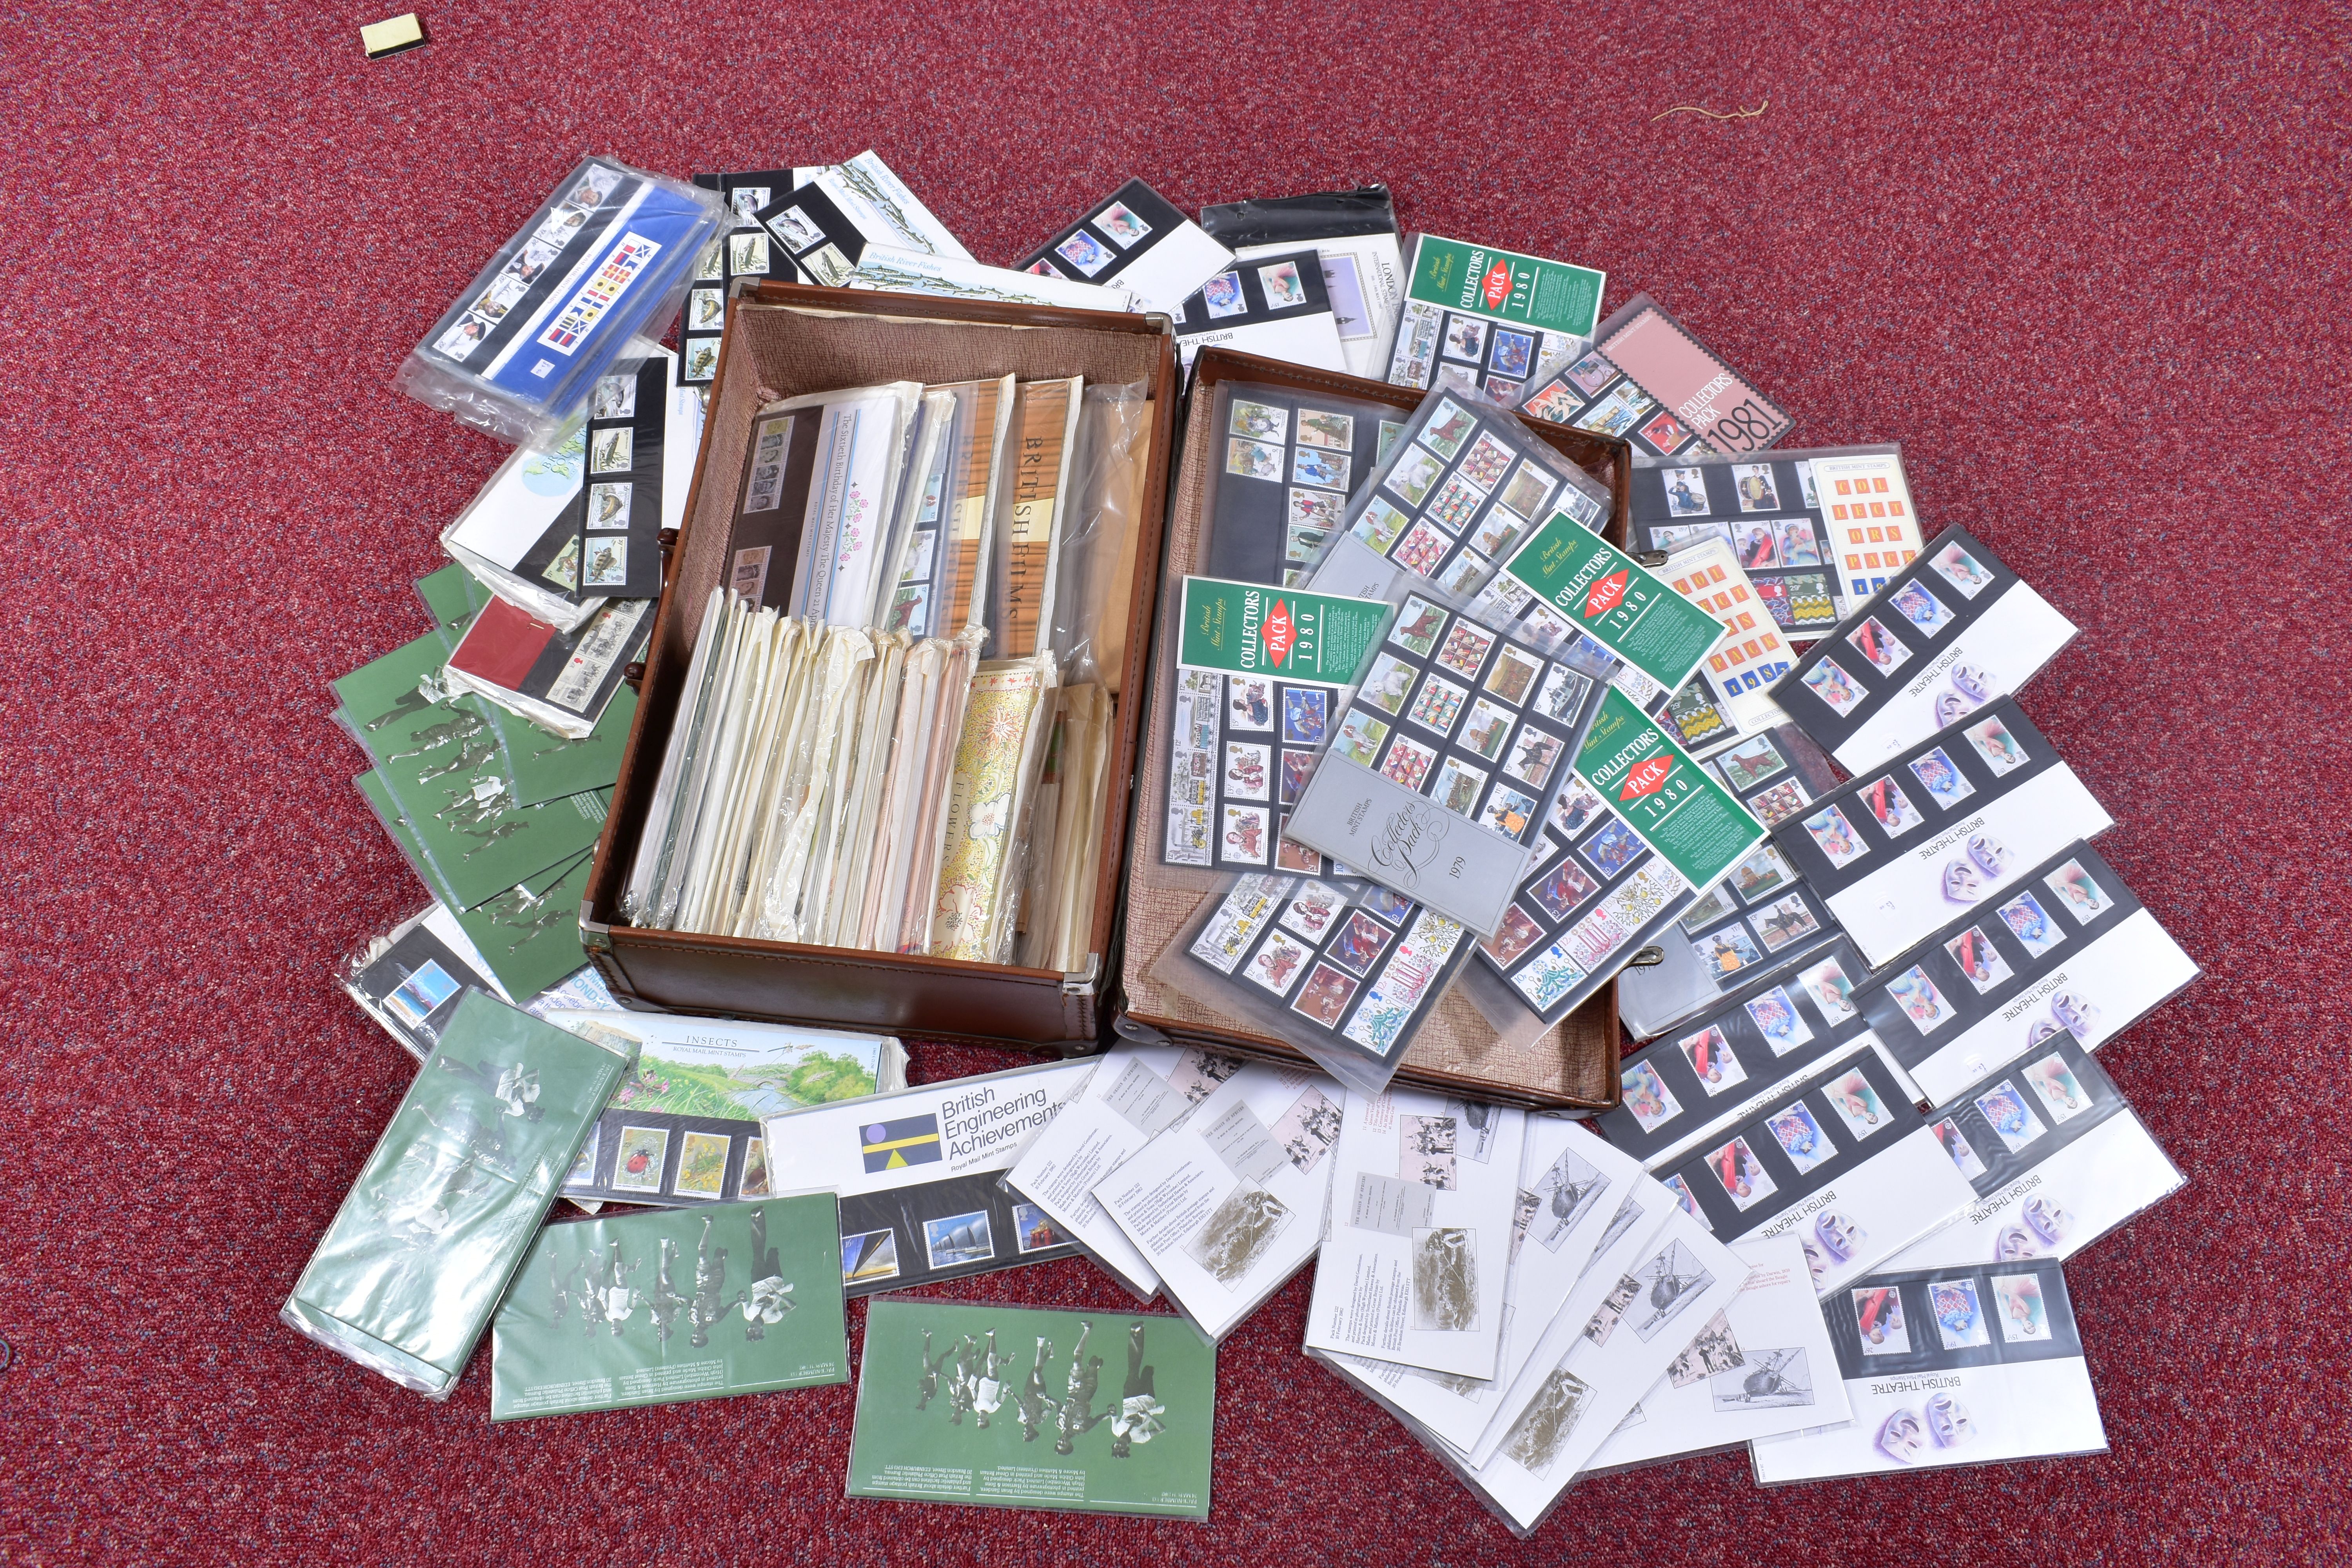 DUPLICATED GB PRESENTATION STAMP PACKS, in a battered old suitcase, year packs from 1980s, face